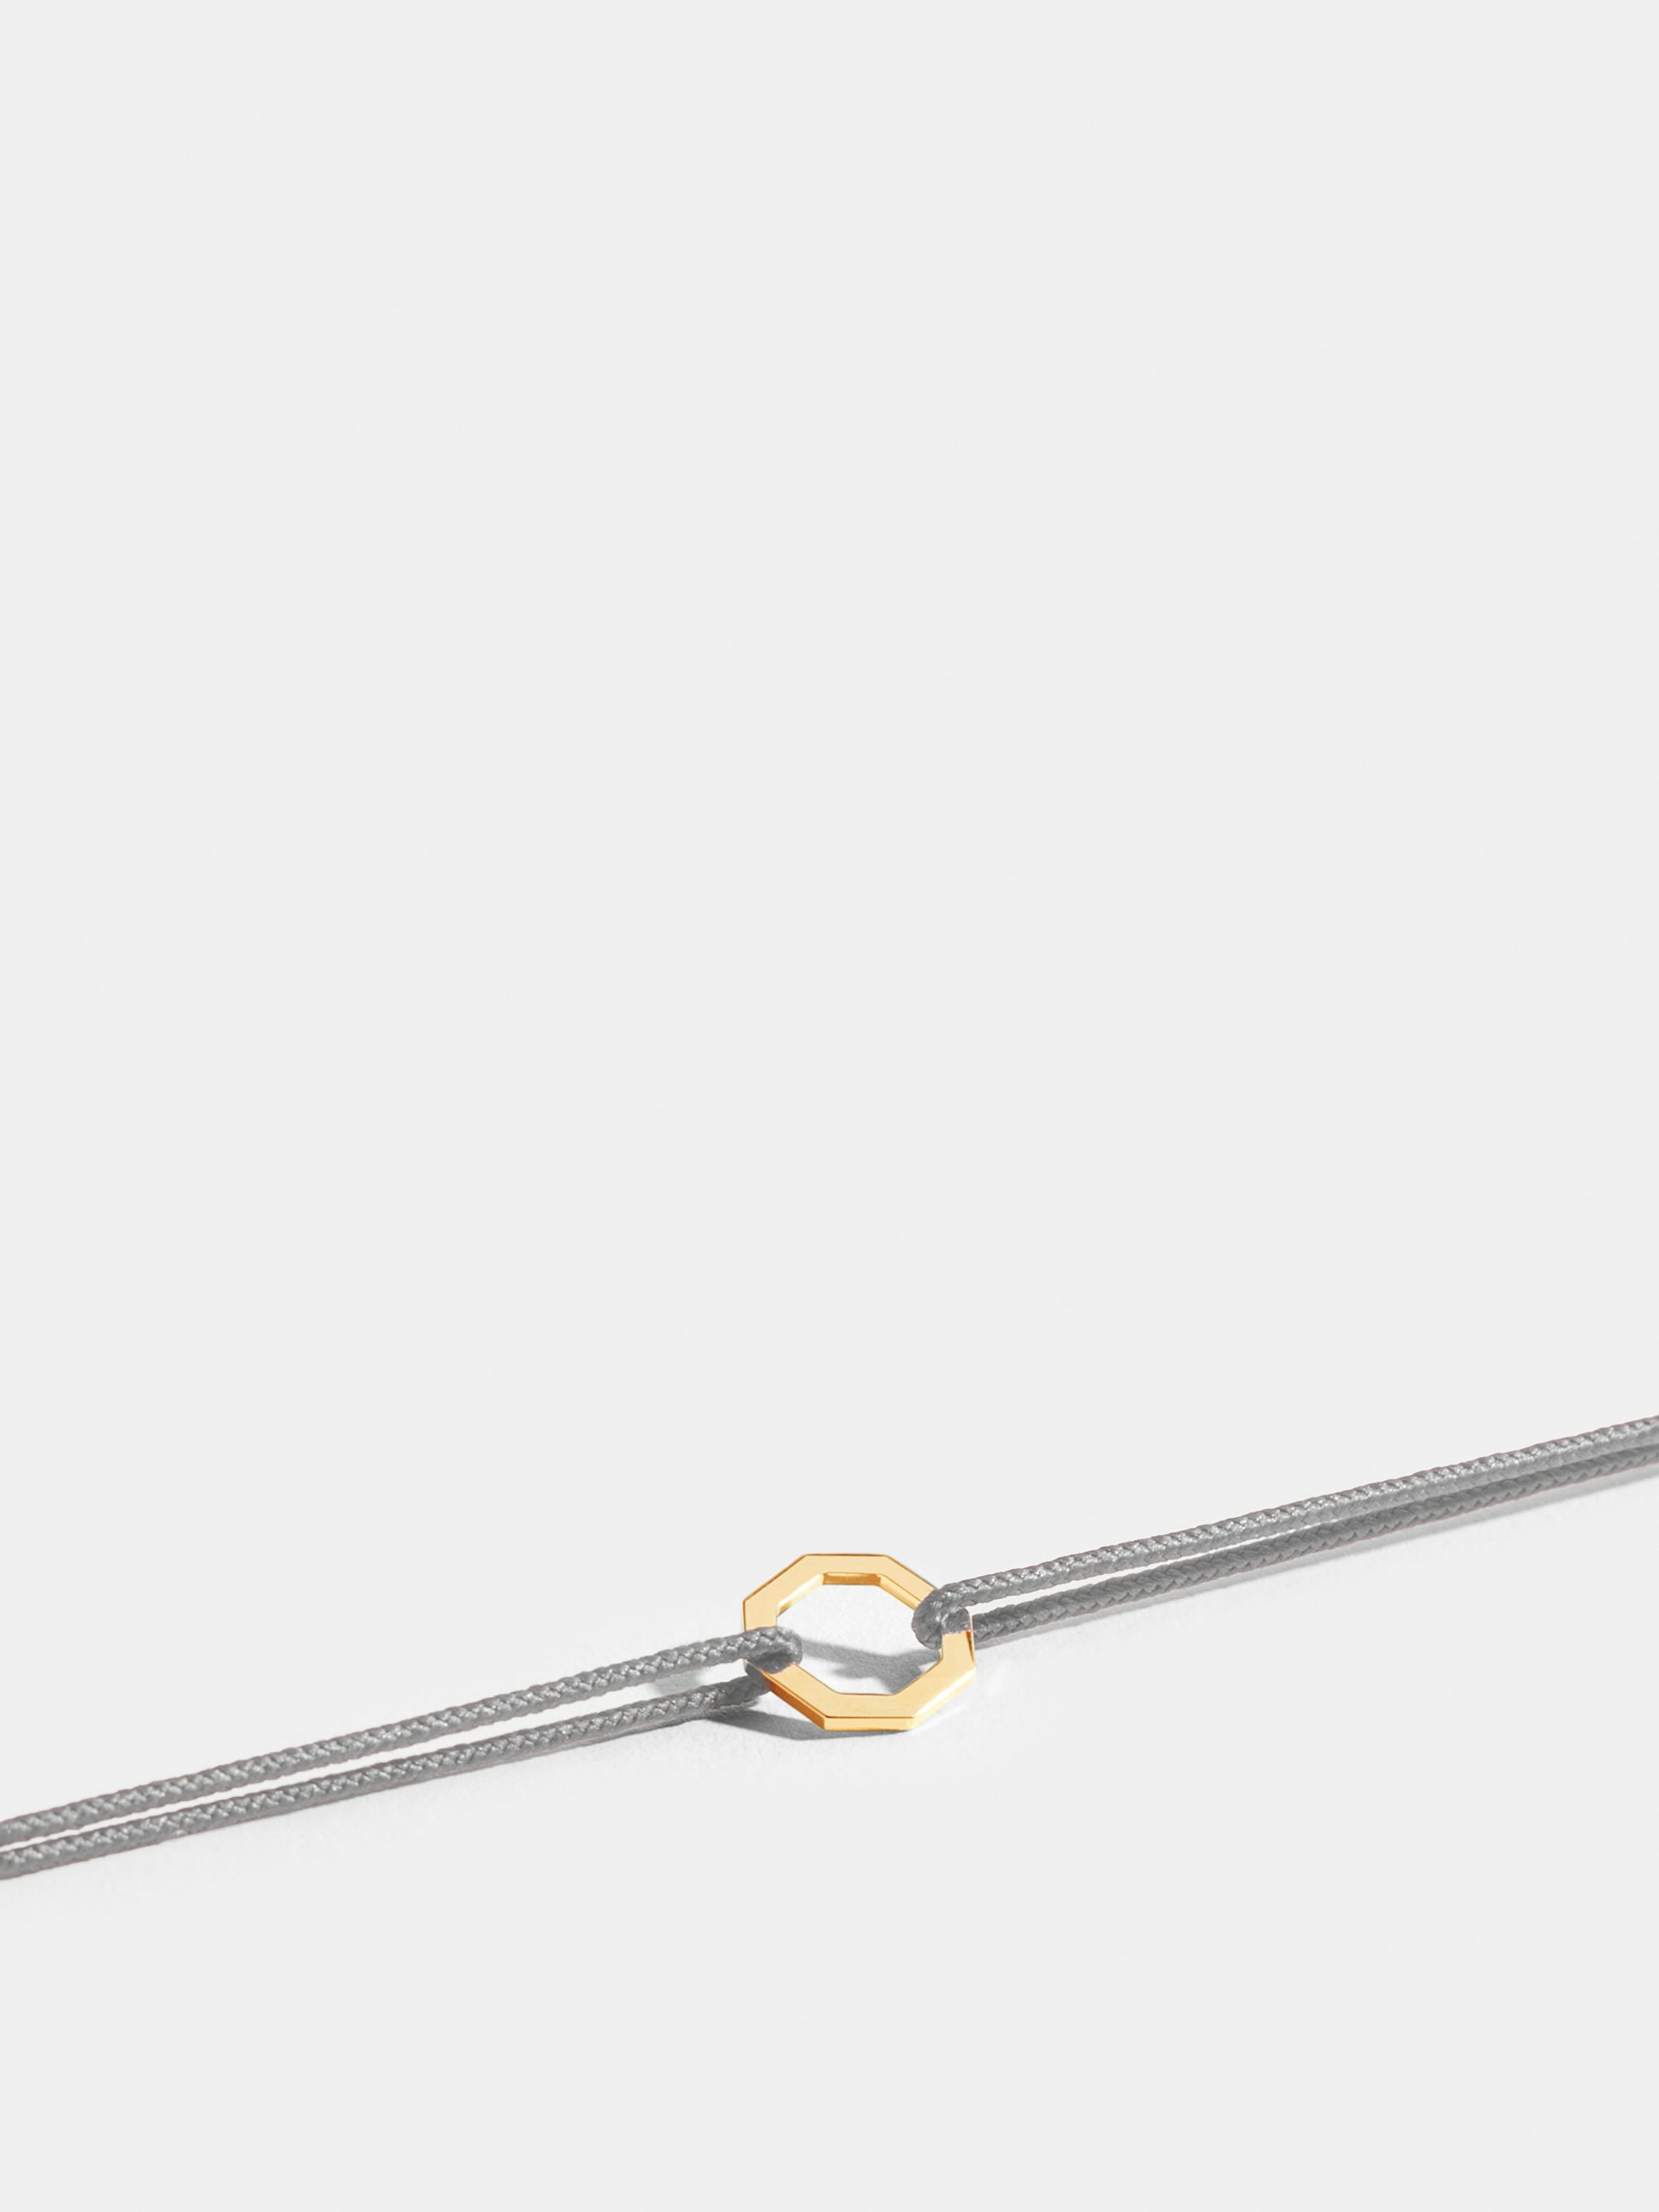 Octogone motif in 18k Fairmined ethical yellow gold, on a pearl grey cord. 